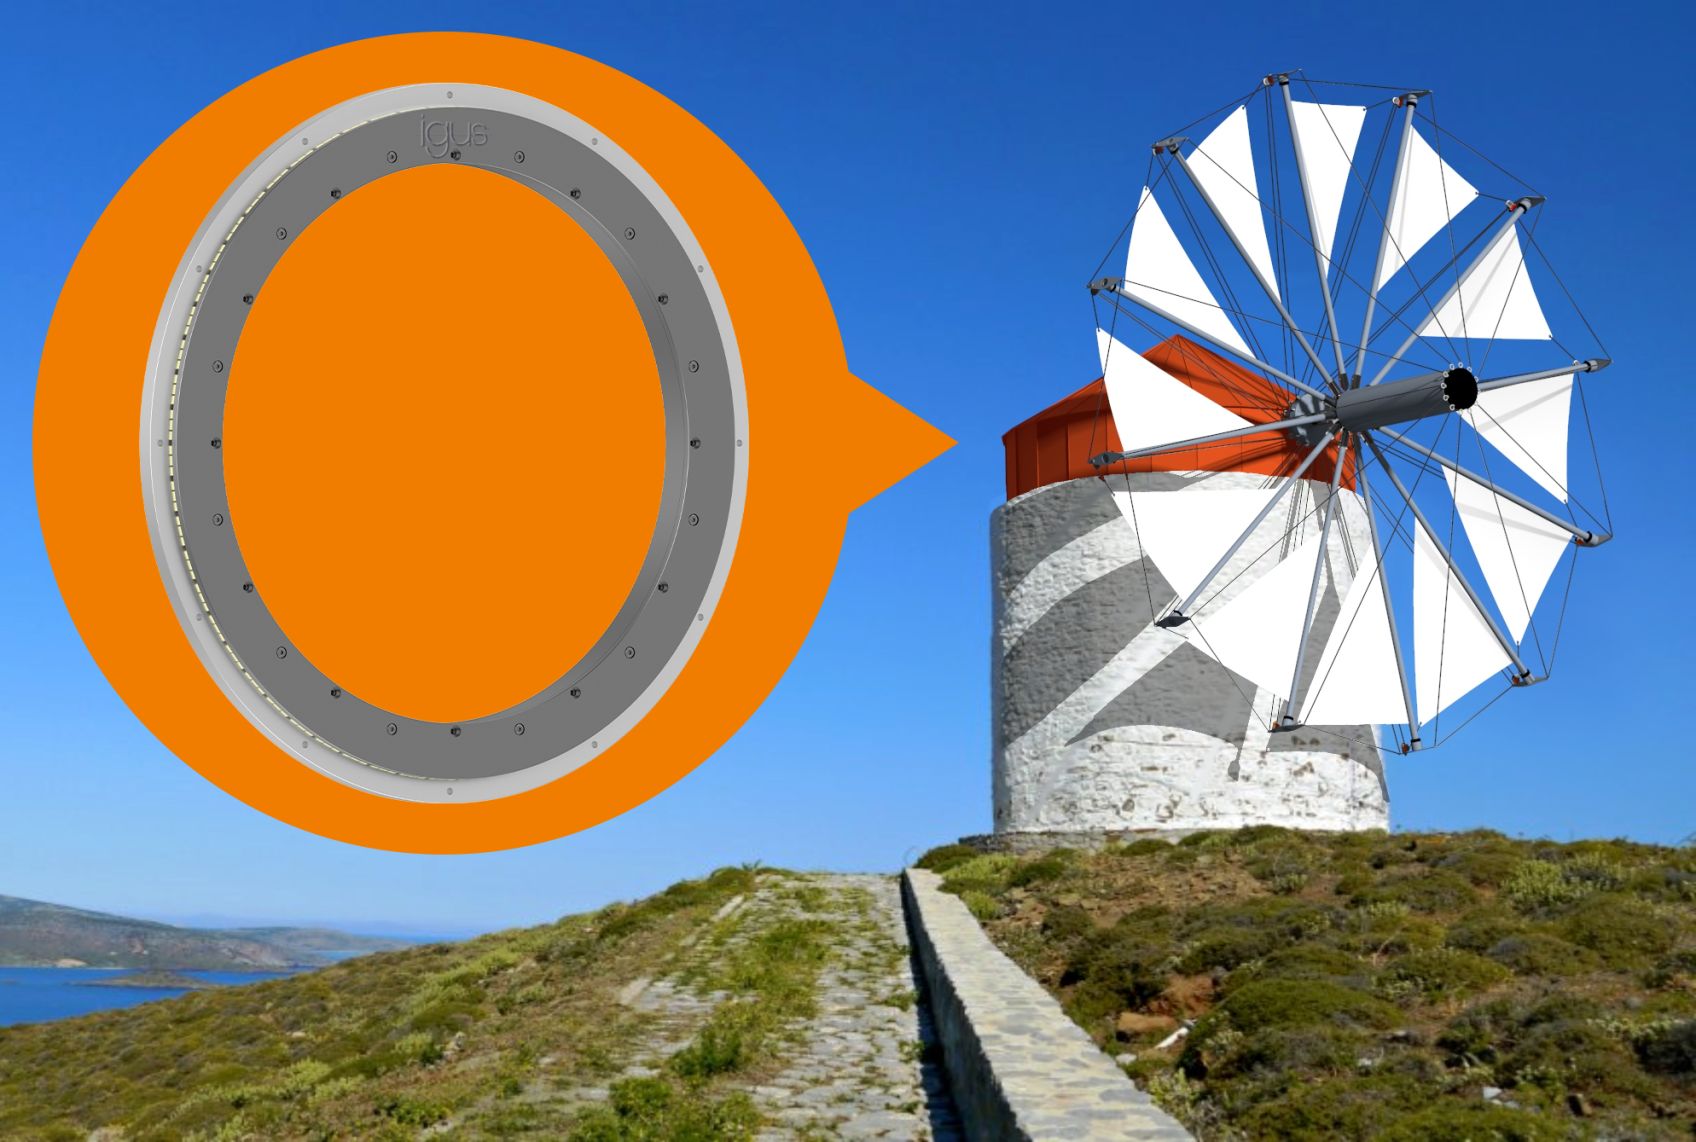 Student project Sailwind 4 will reuse old windmills for power generation, with support from Igus